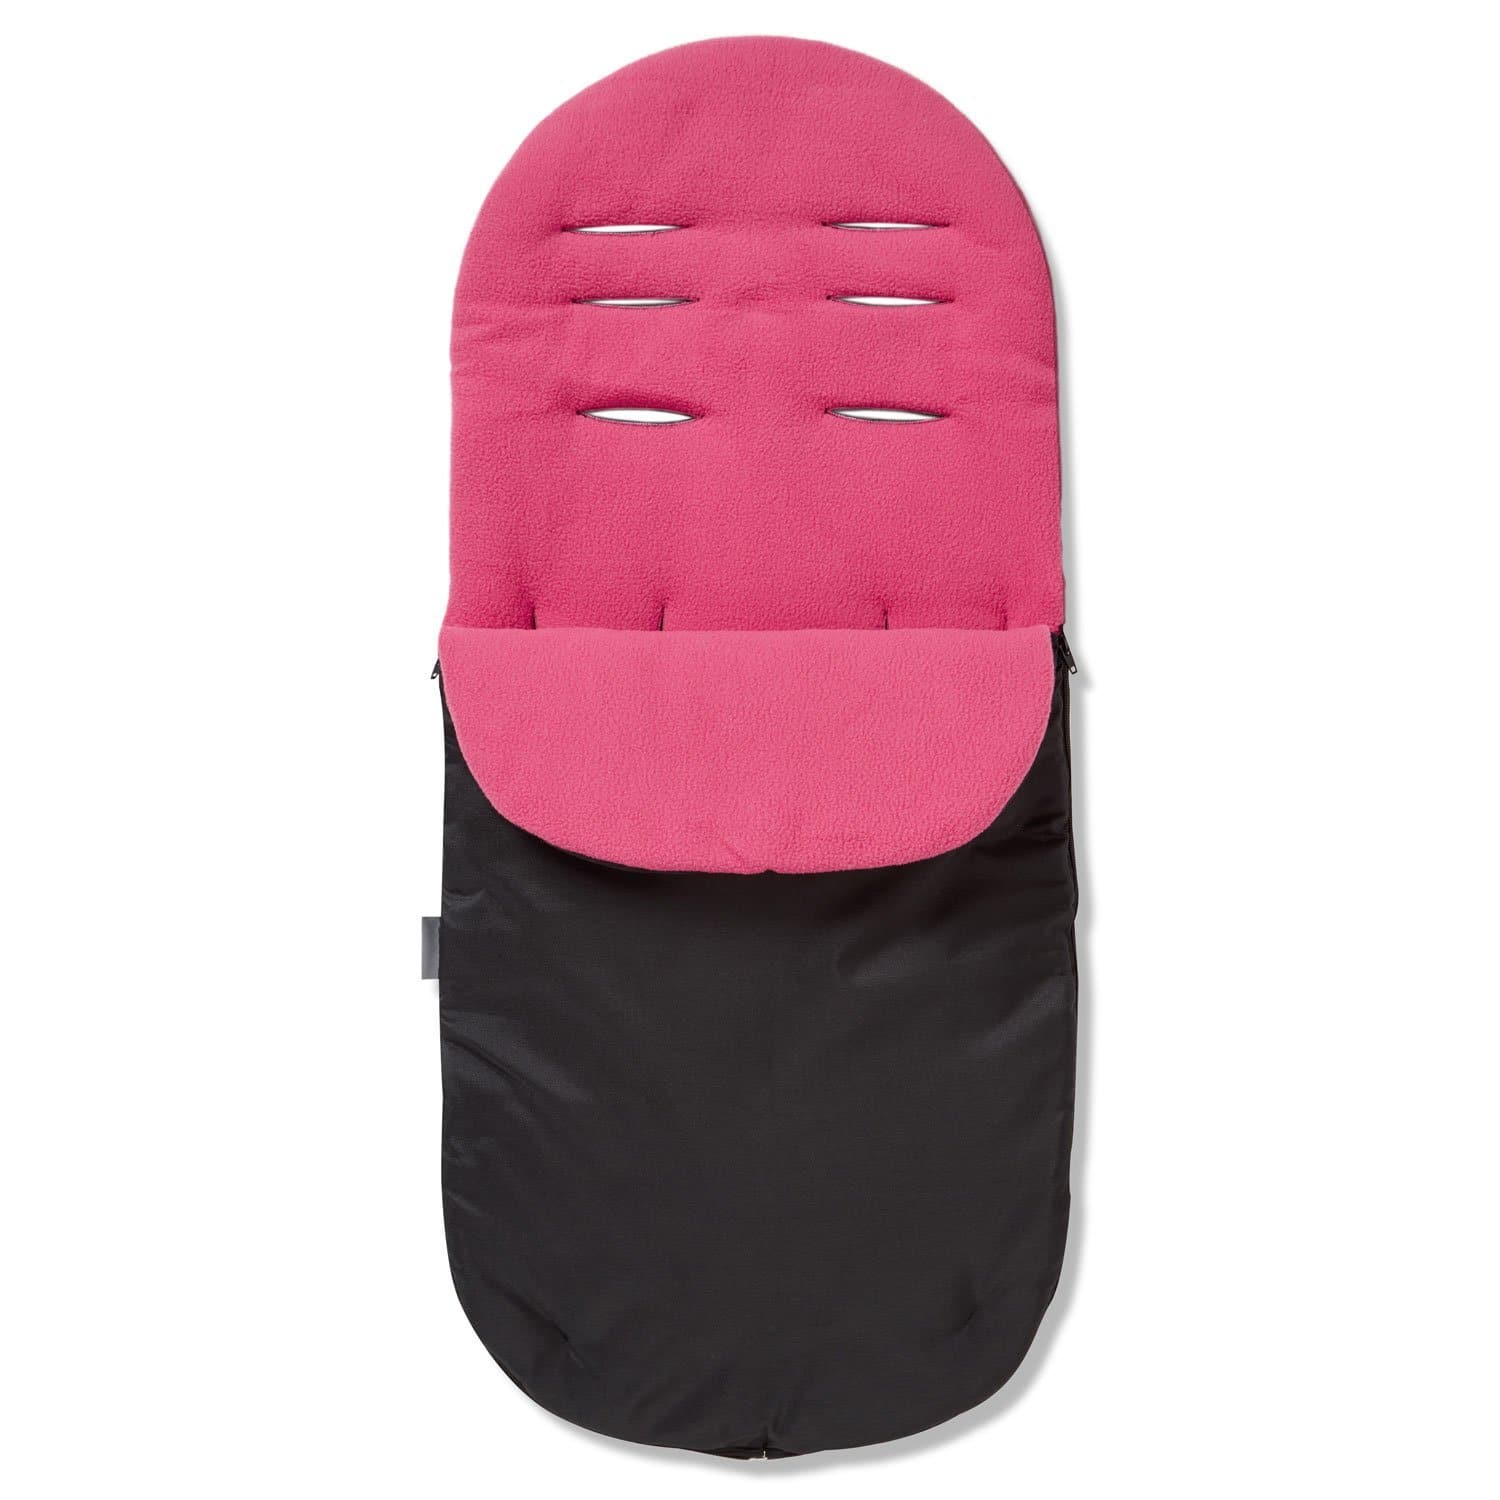 Footmuff / Cosy Toes Compatible with BabySun - Dark Pink / Fits All Models | For Your Little One